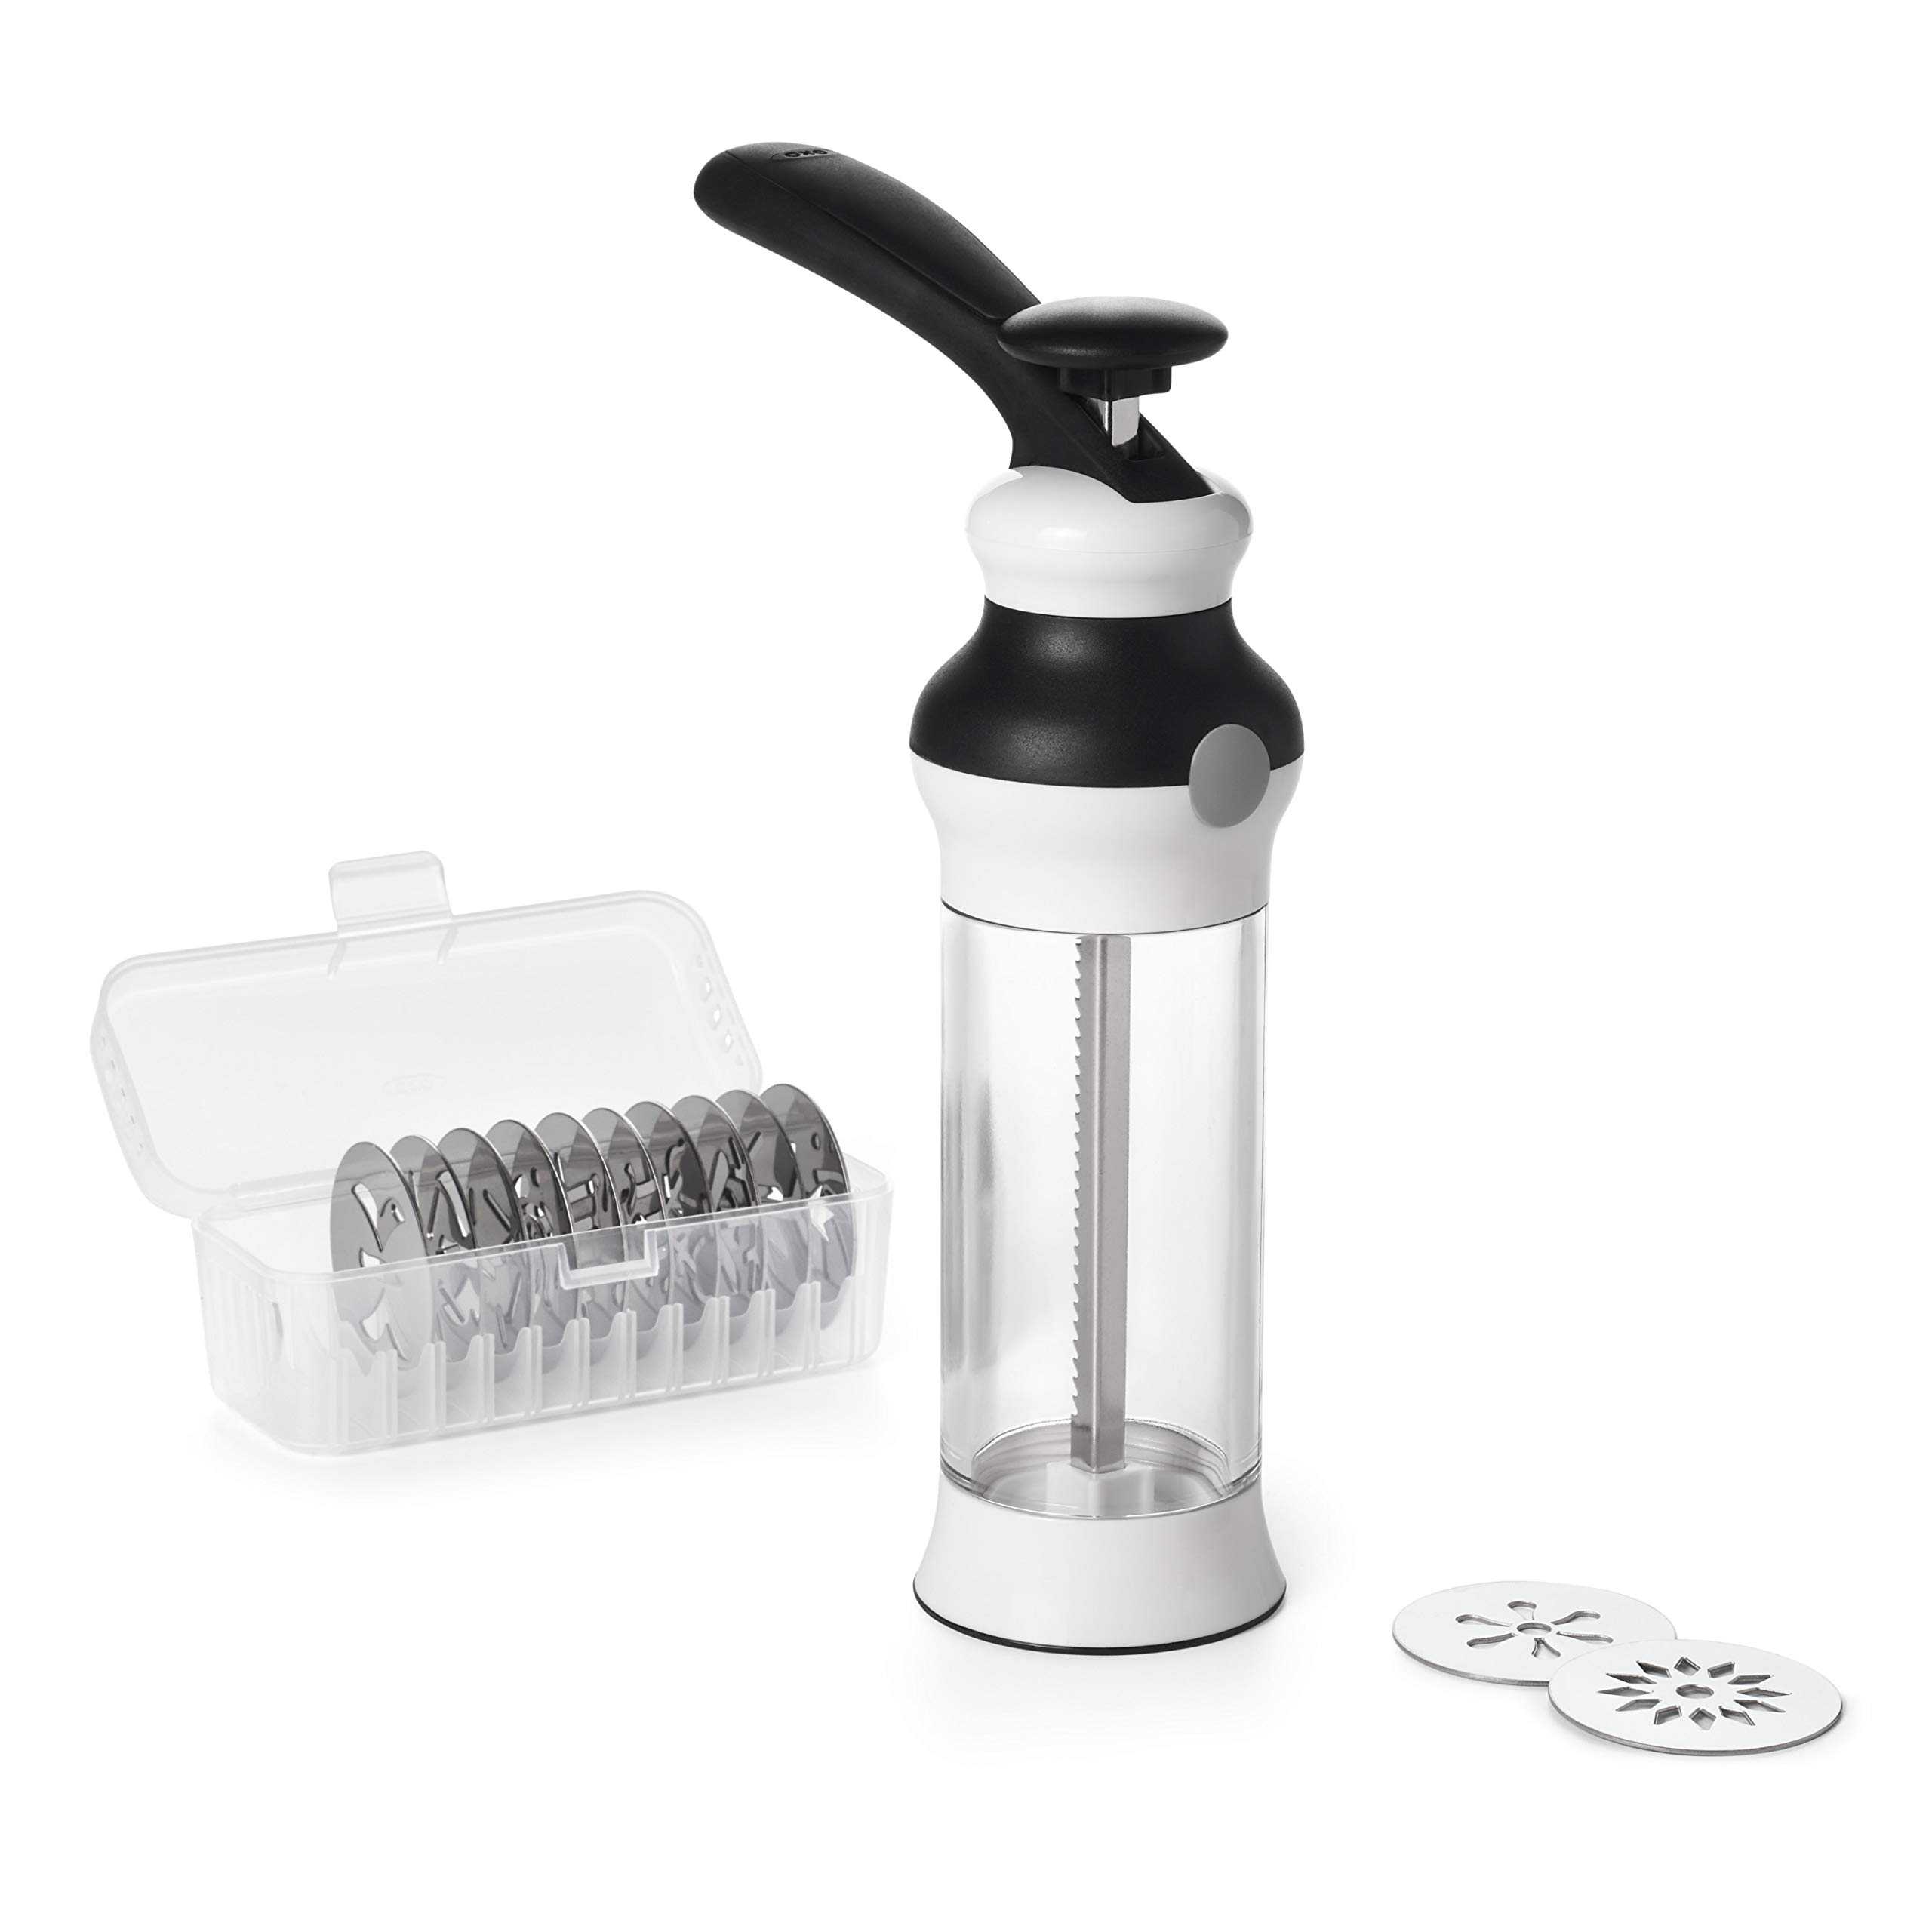 OXO Good Grips kitchen gadgets Christmas gifts on